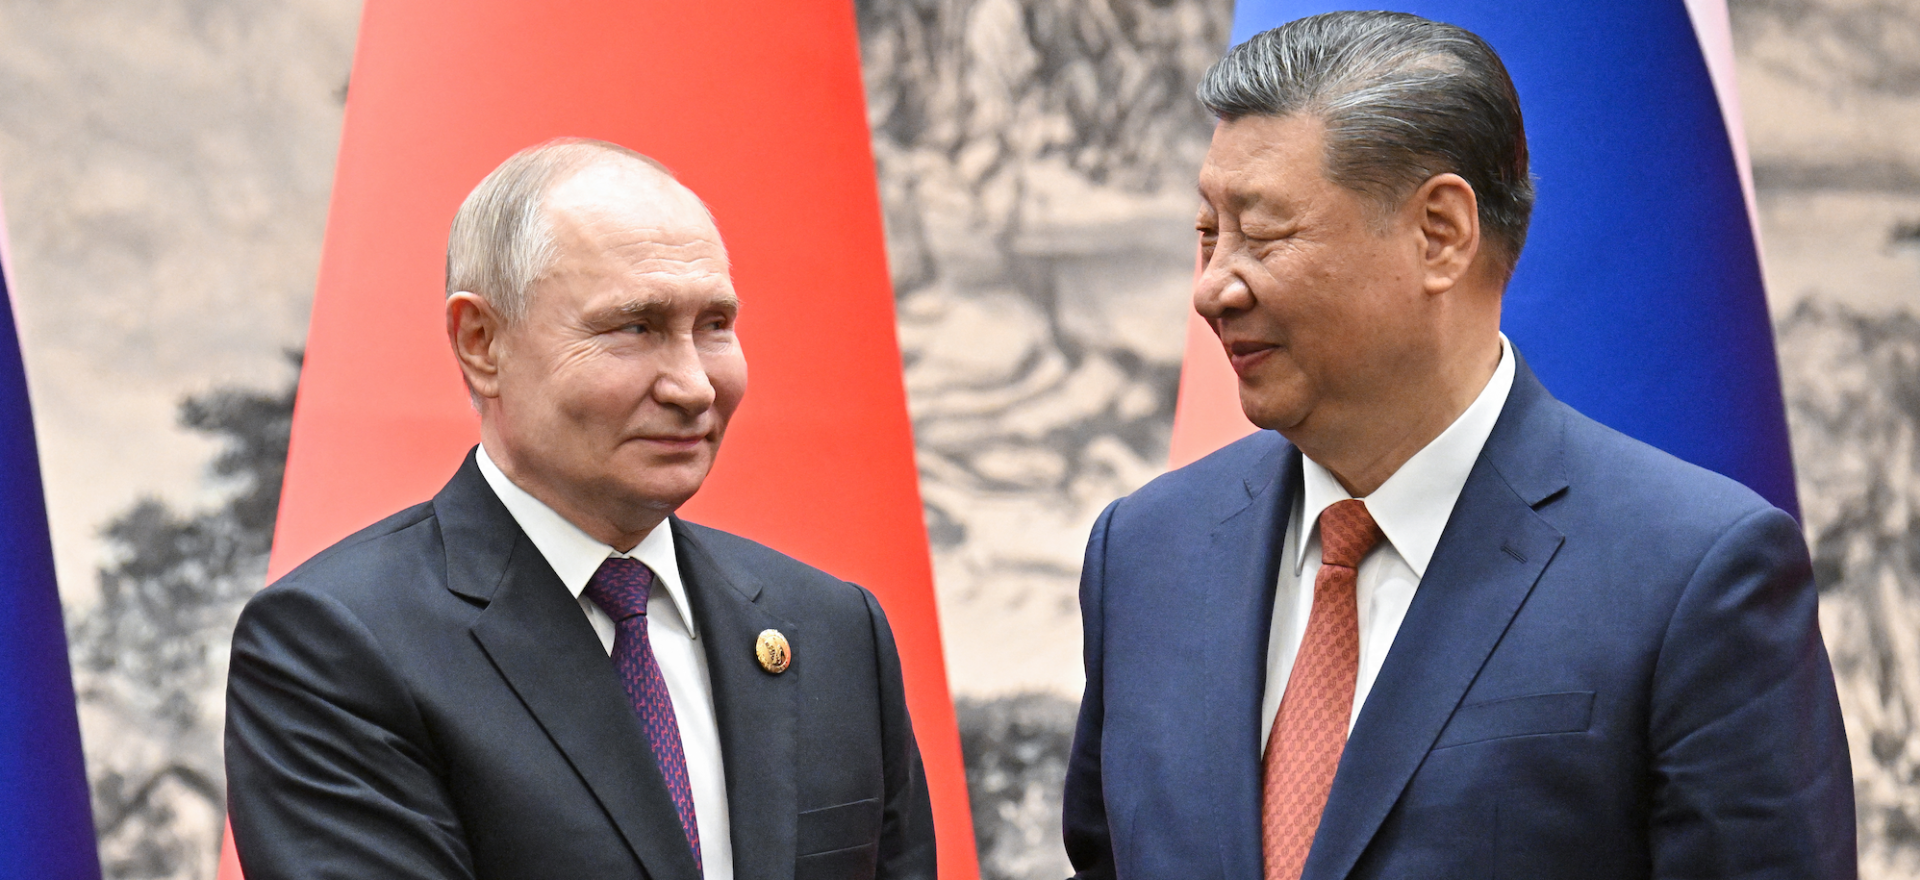   Russia’s President Vladimir Putin and China’s leader Xi Jinping shake hands during a signing ceremony following their talks in Beijing on May 16, 2024. (Photograph distributed by the Russian state agency Sputnik.)